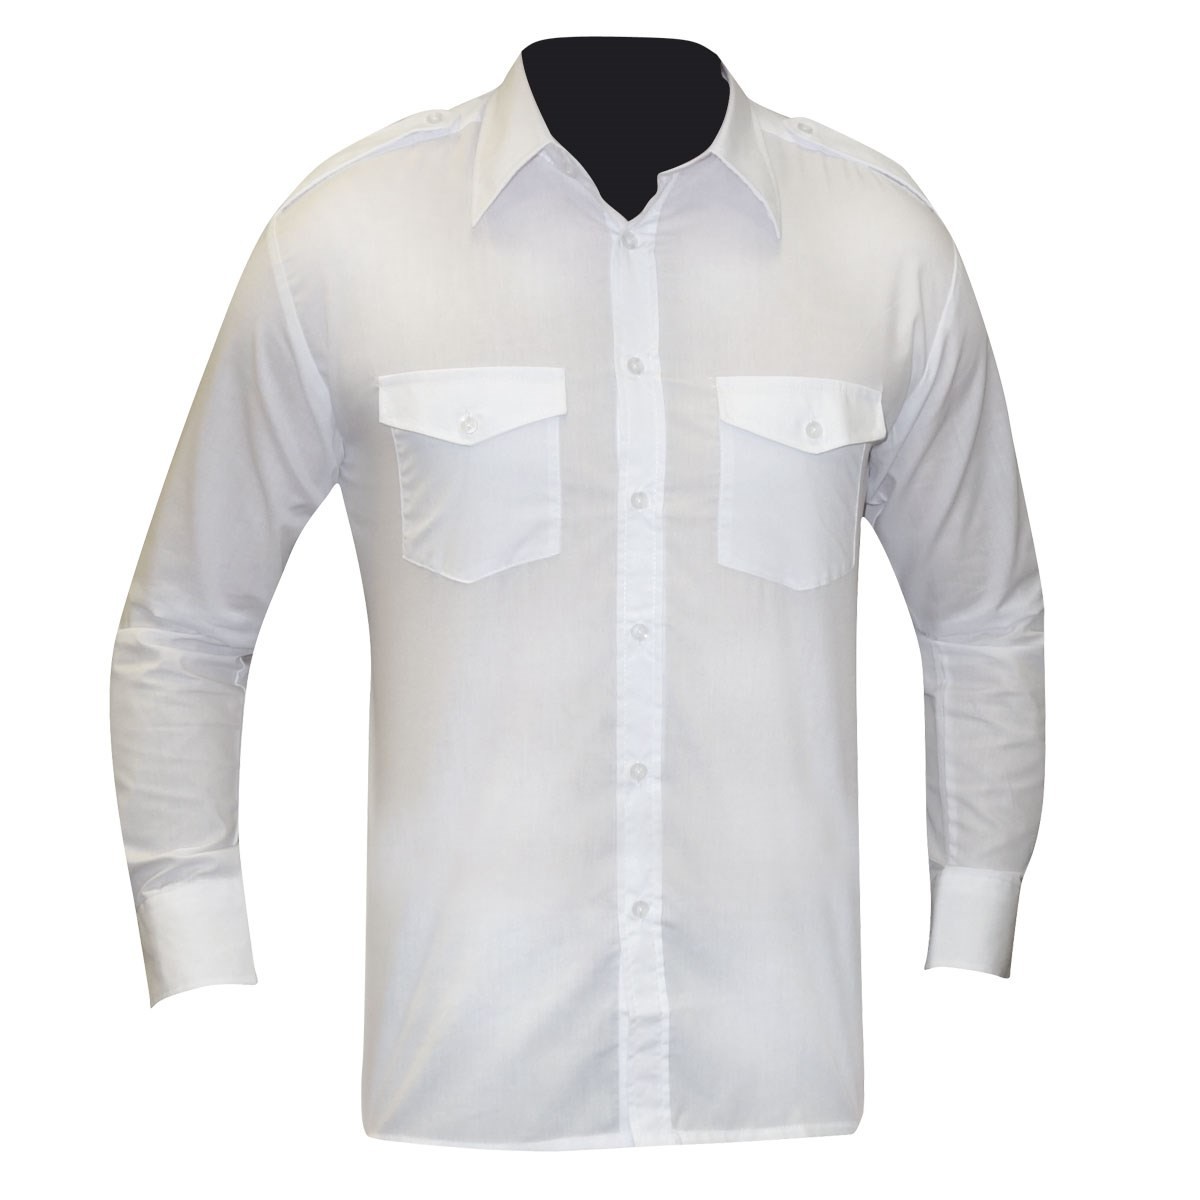 chemise-pilote-blanche-manches-longues